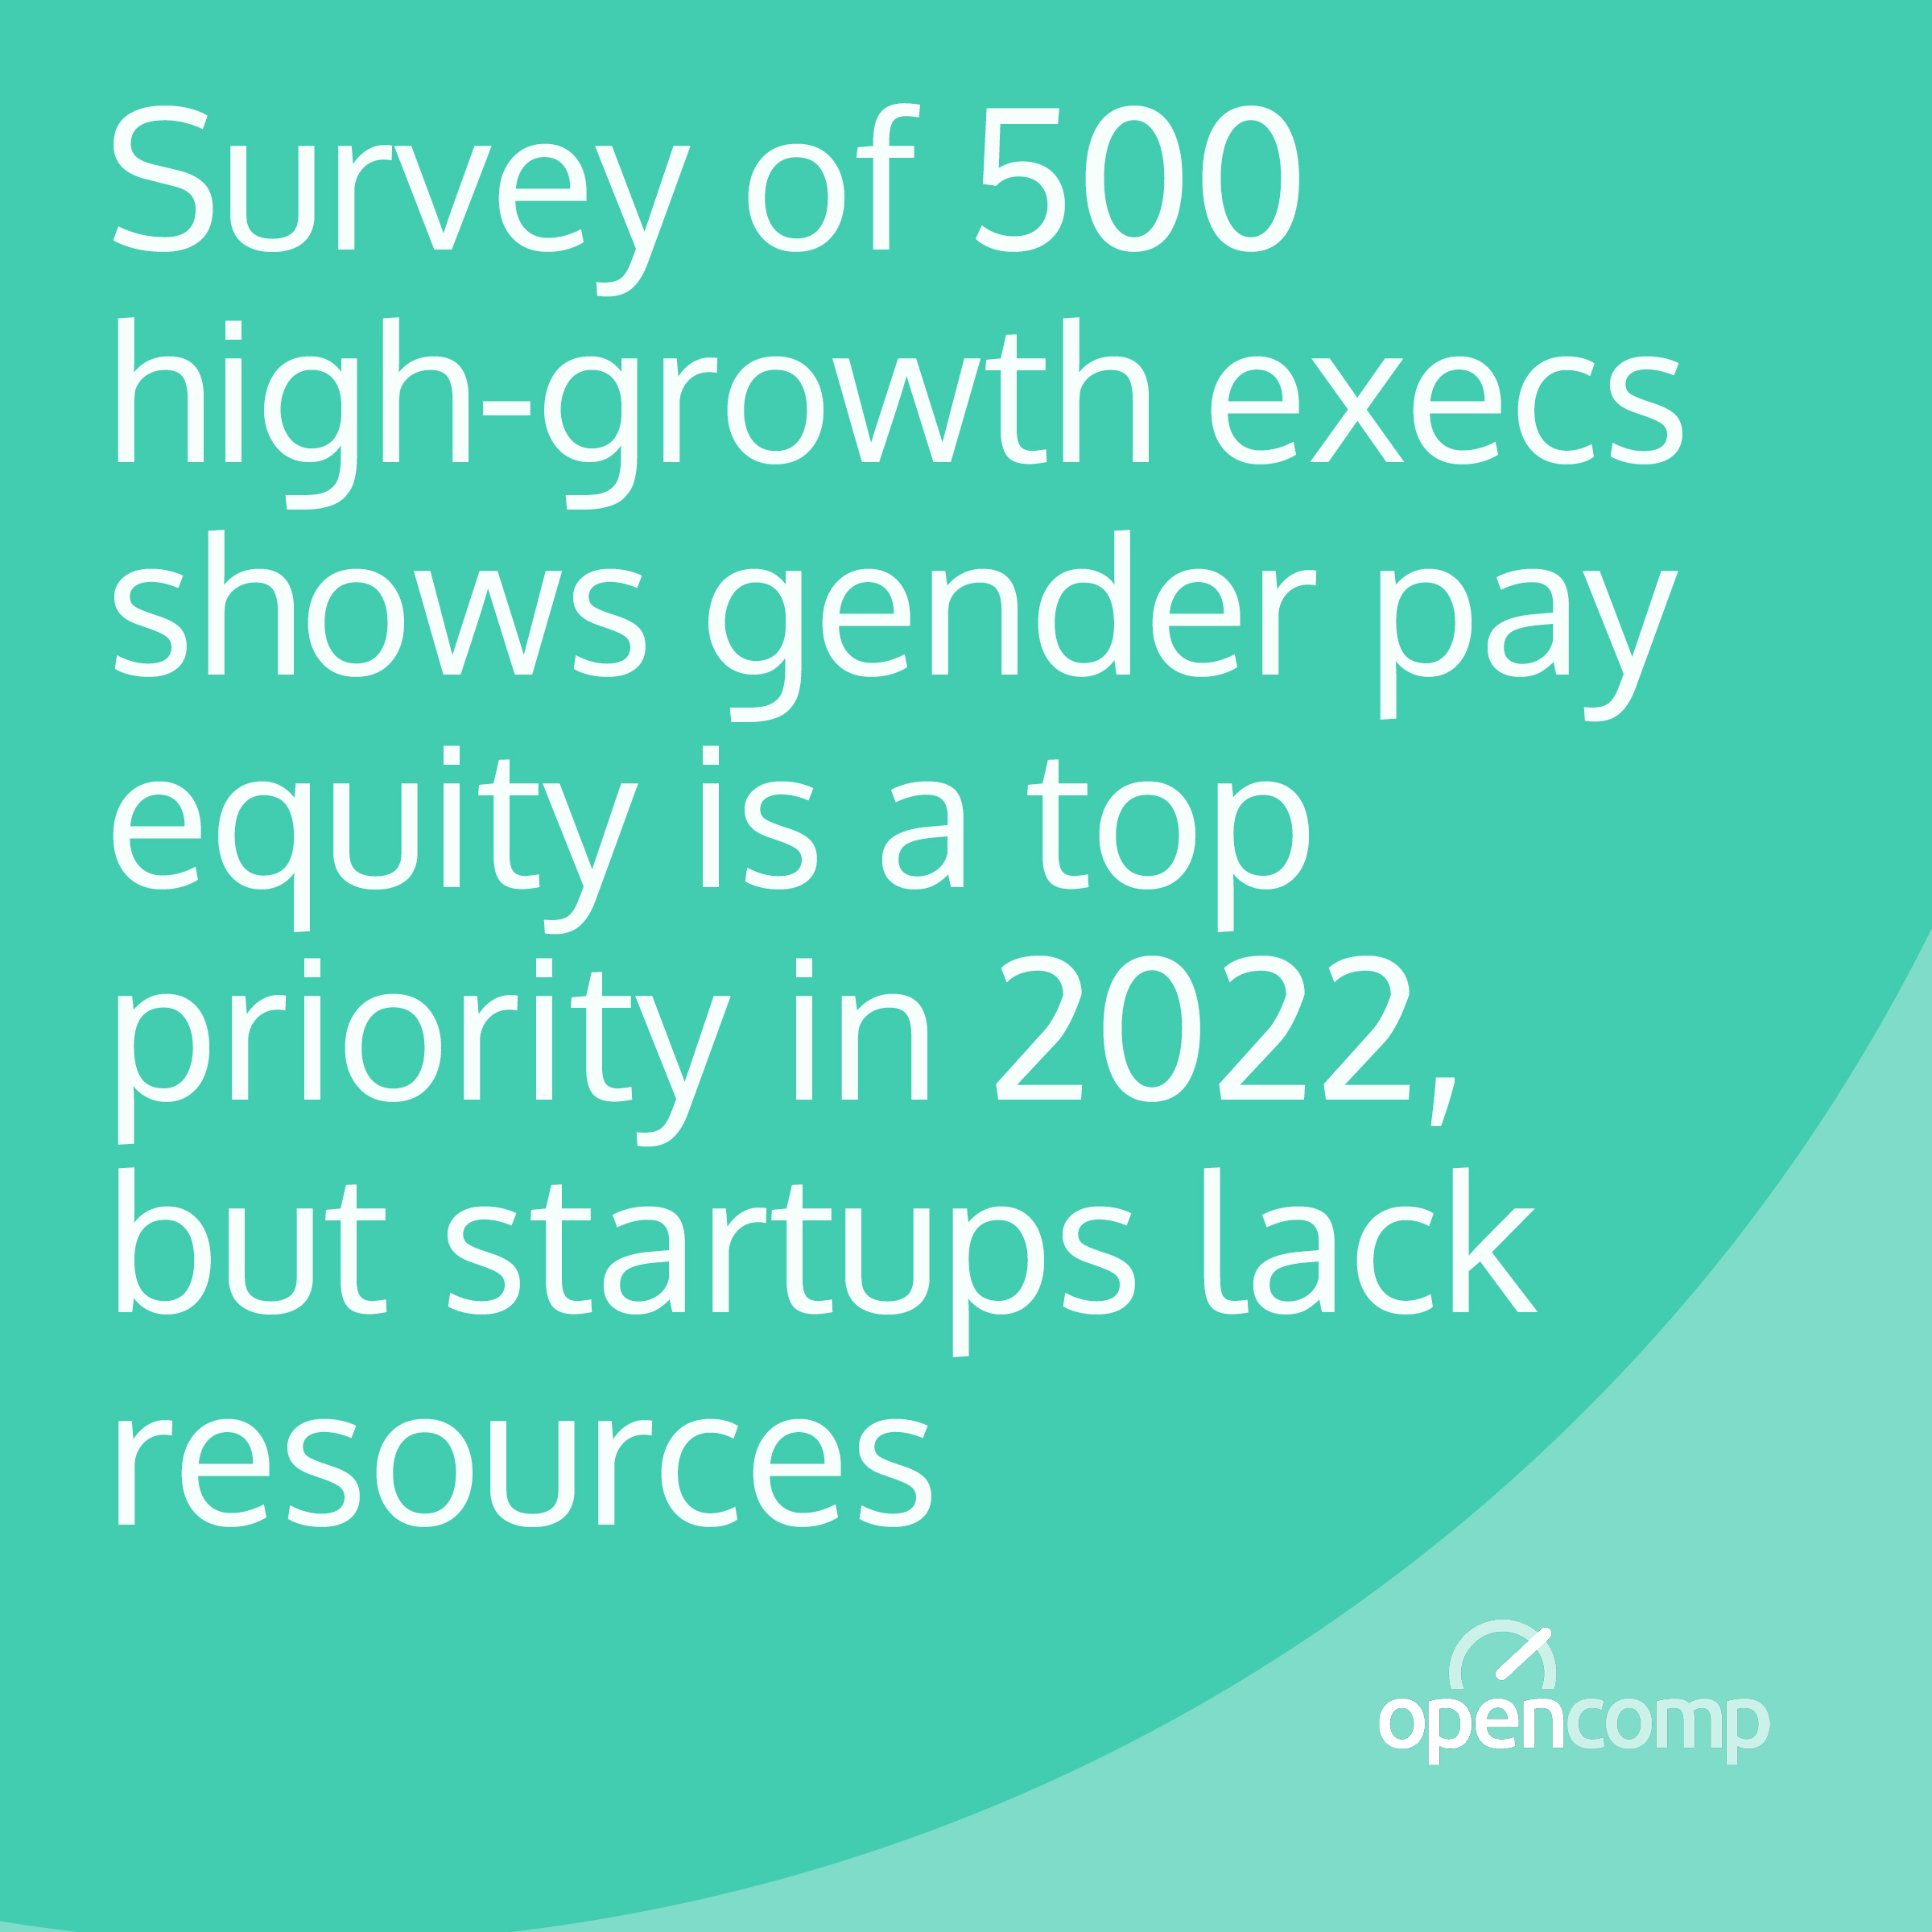 Startup Challenges to Gender Pay Equity Revealed